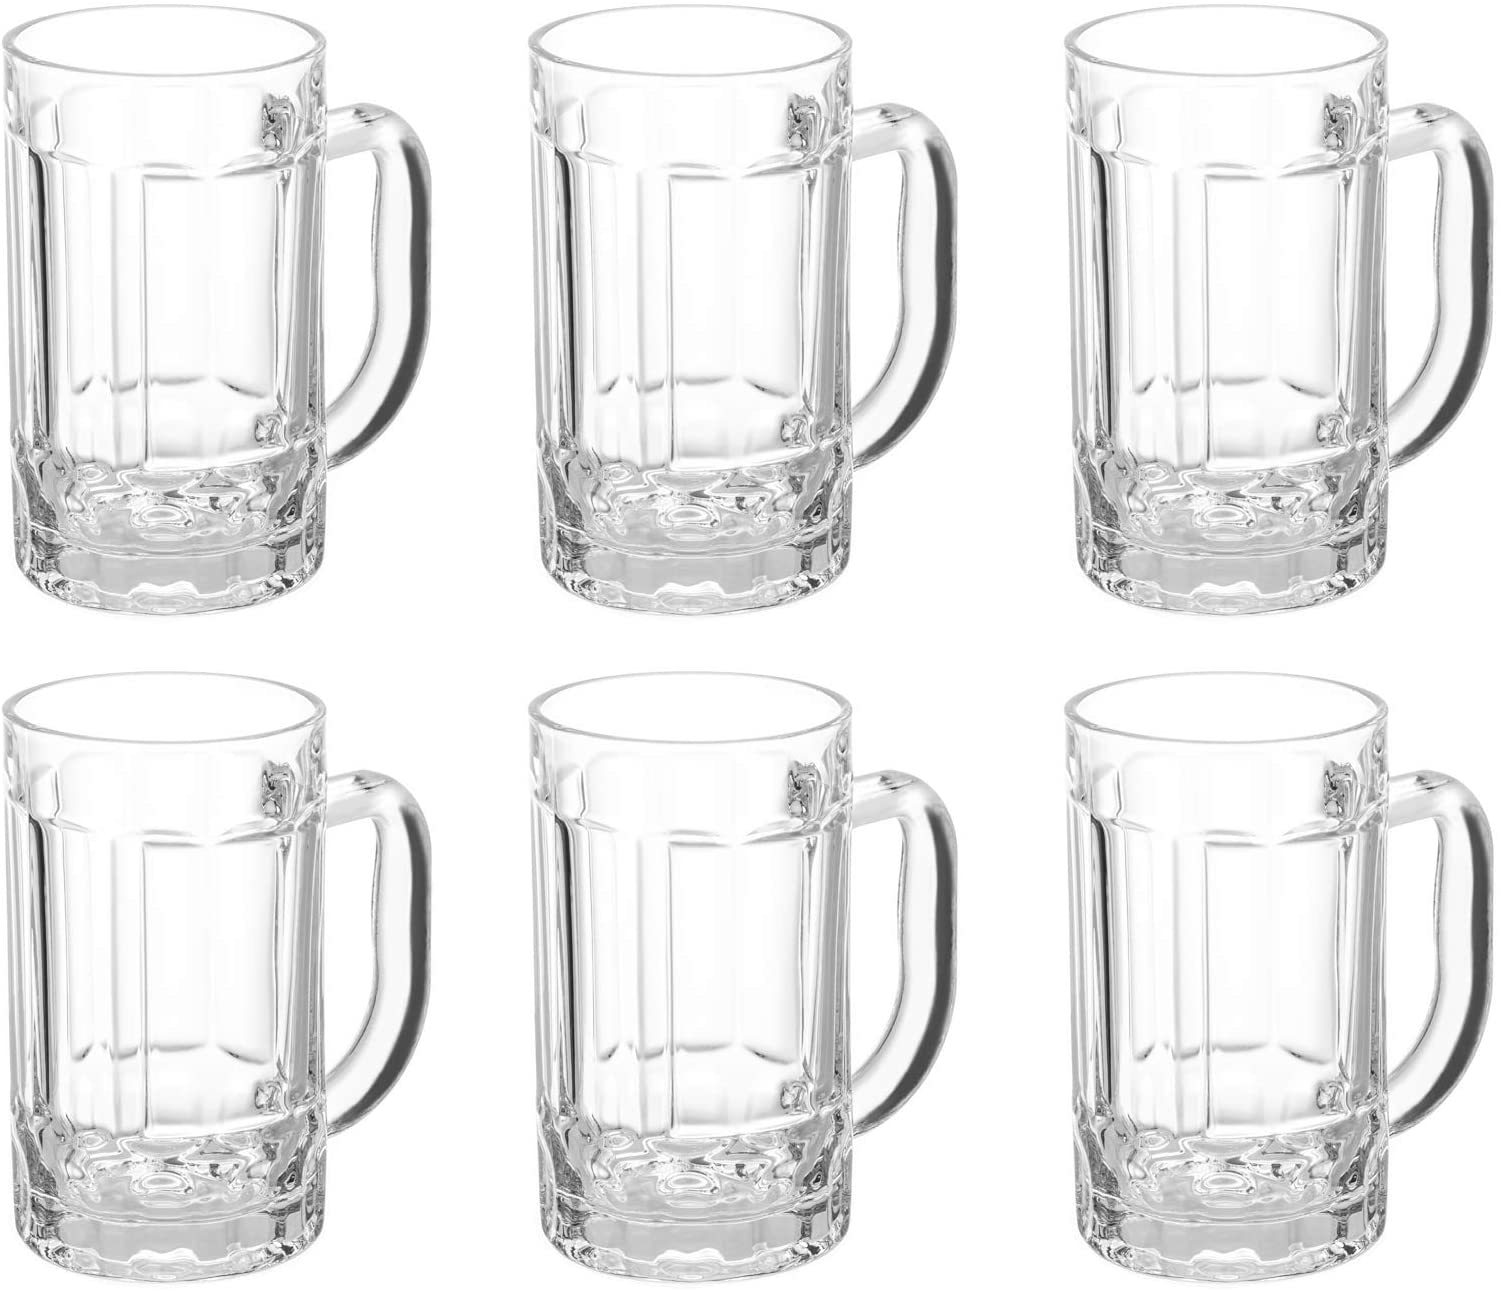 Large Beer Glasses with Handle - 14 Ounce Glass Steins Bottom Price Beer Glass